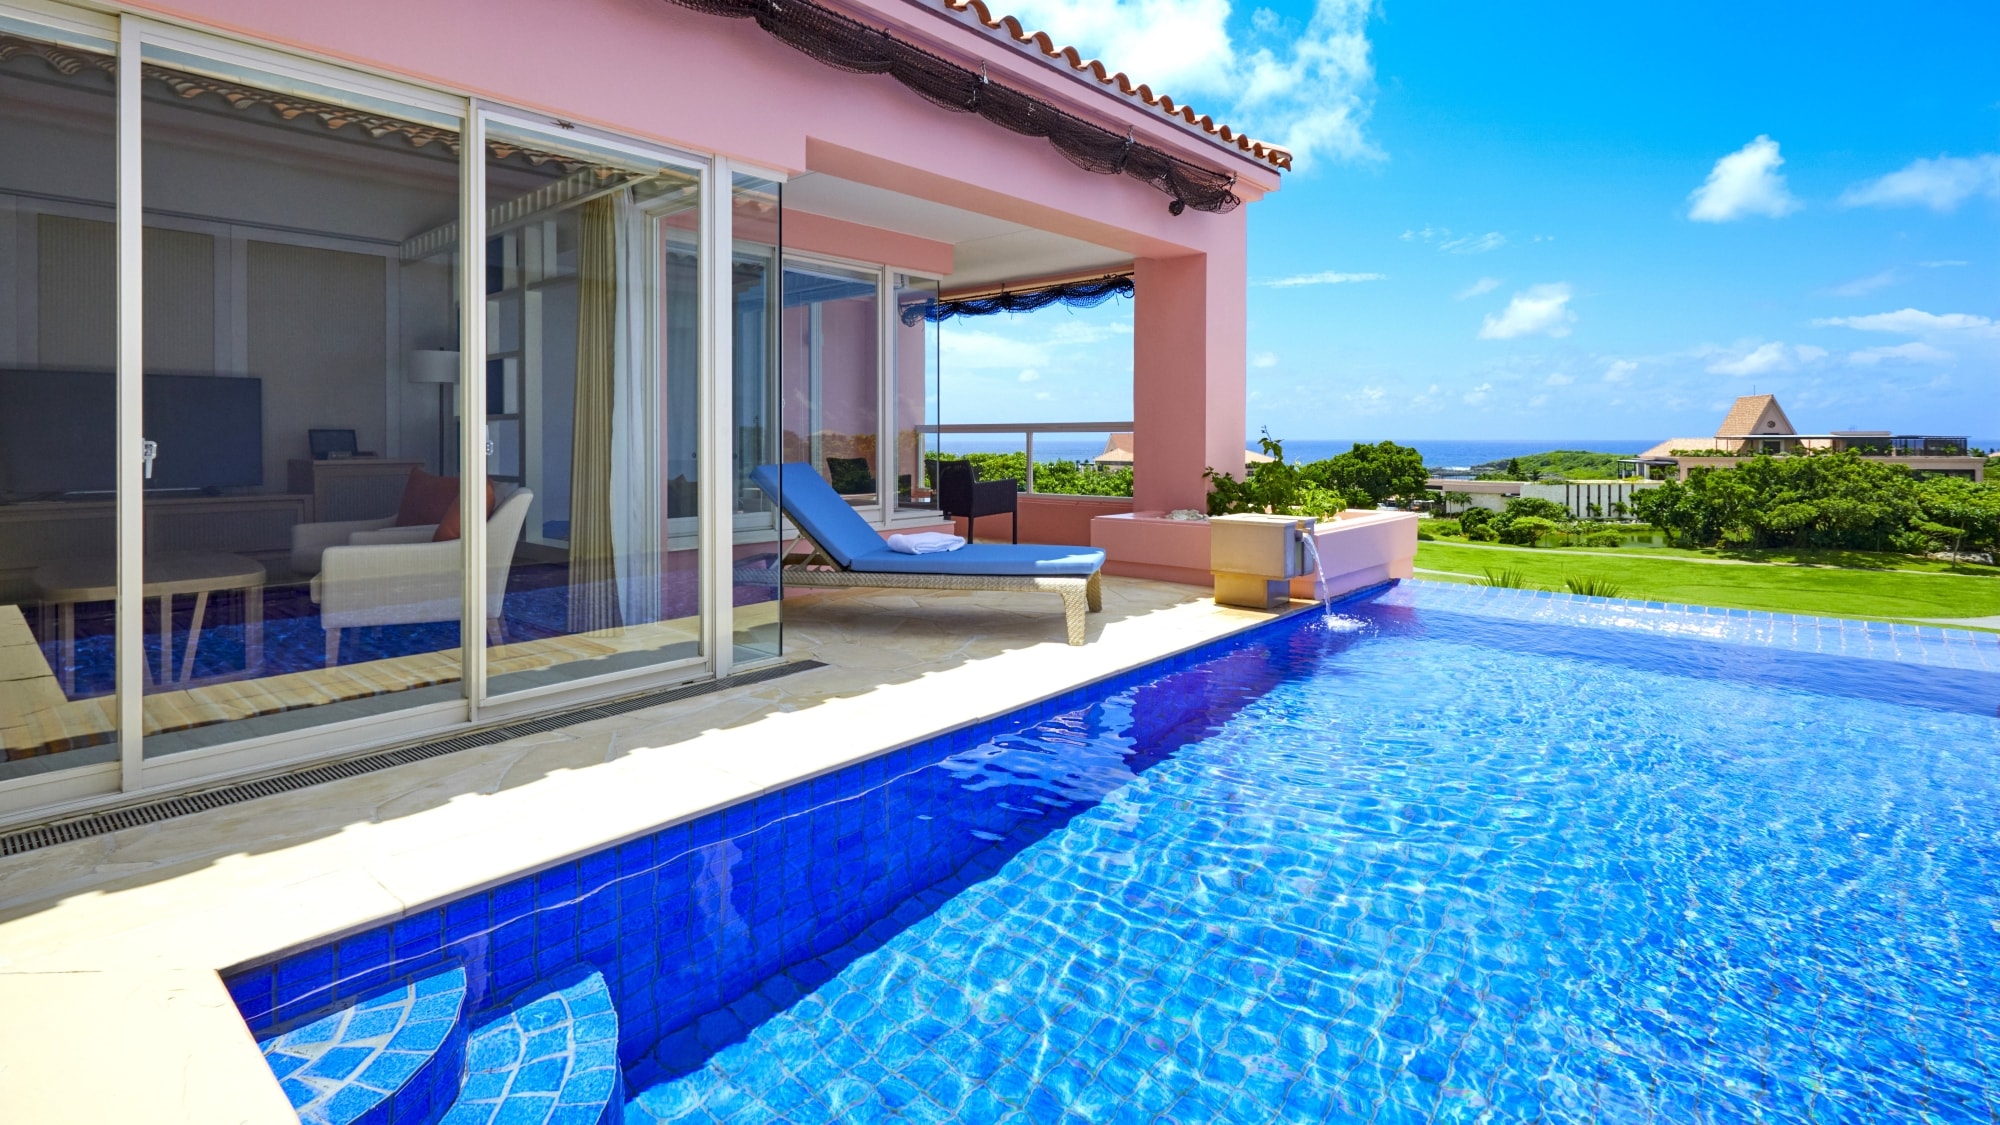 [Pool Villa Premier 2F] A private pool with a dazzling blue water surface spreads out on the terrace.